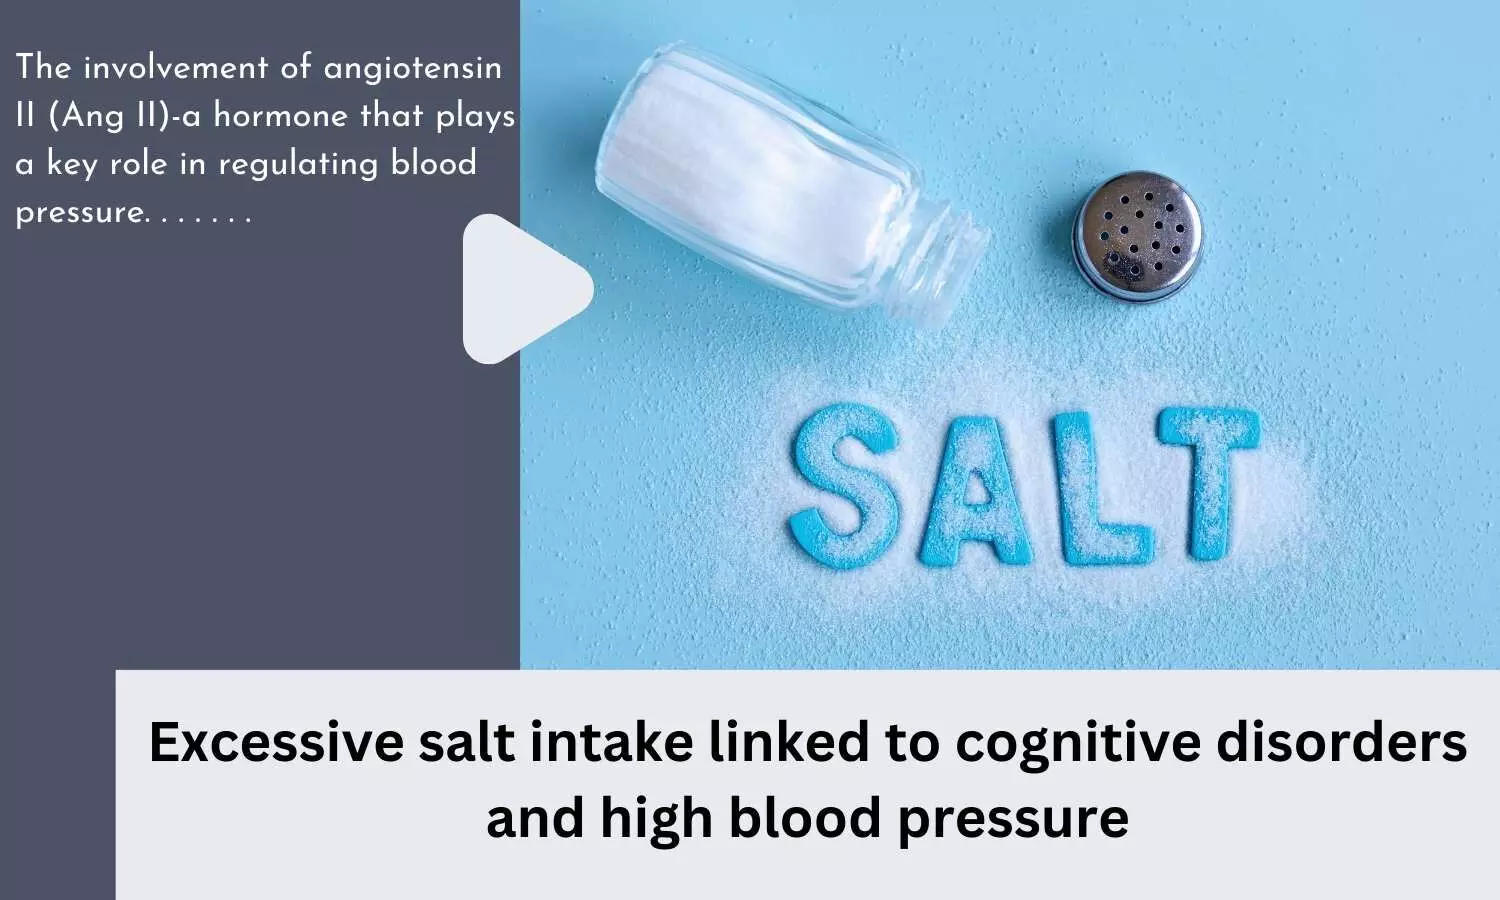 Excessive salt intake linked to cognitive disorders and high blood pressure